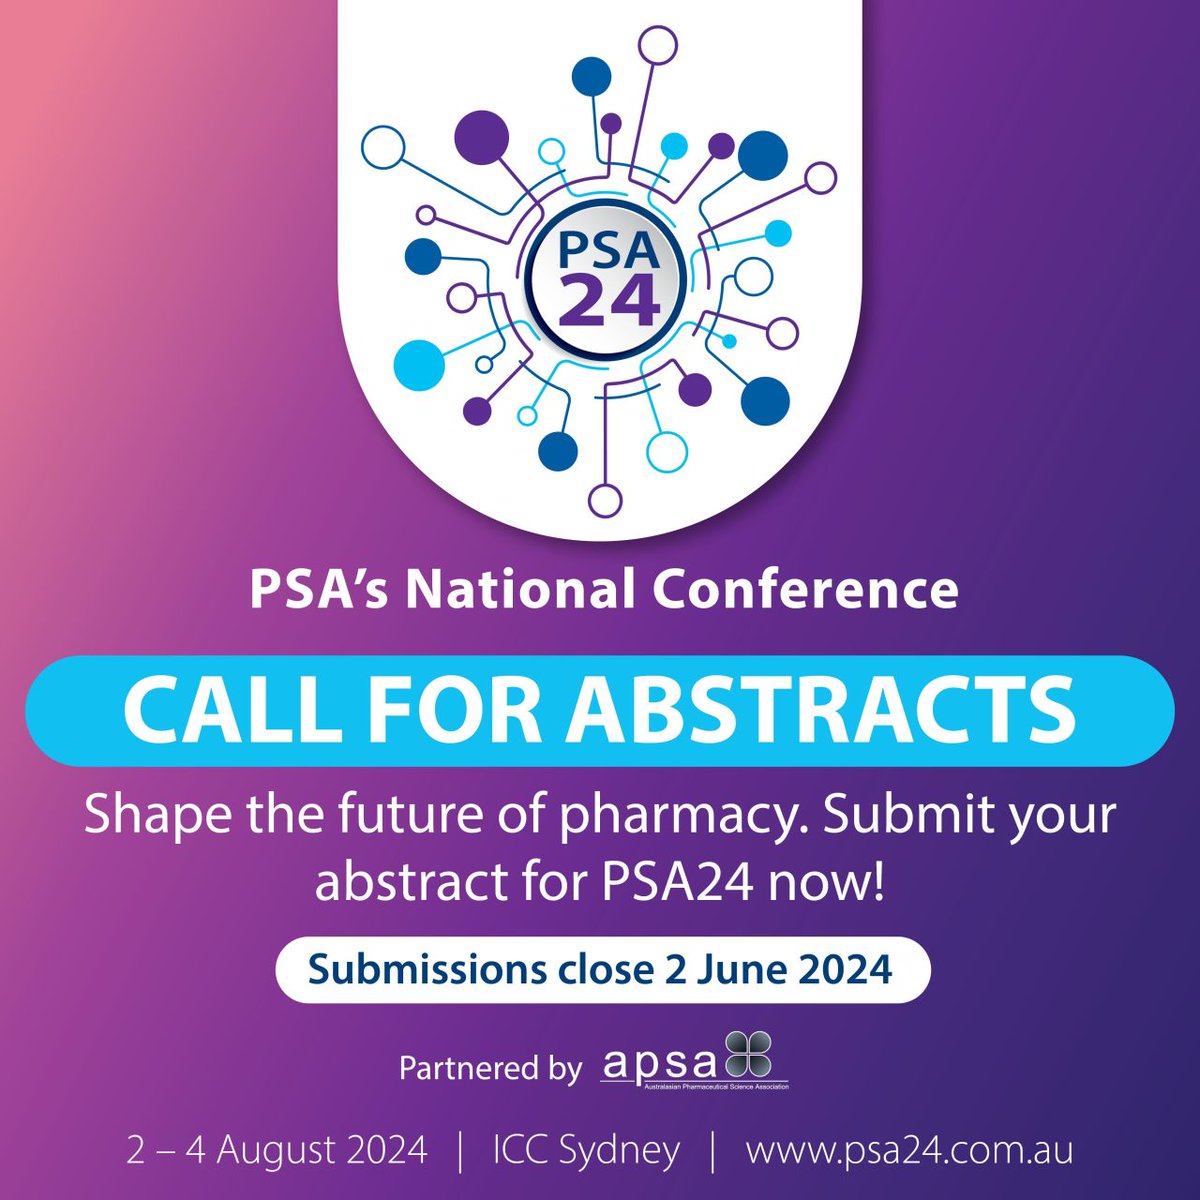 Academics & innovators in pharmacy, your ground-breaking work deserves a platform!

Submit your abstracts for #PSA24 by June 2nd 

Contribute to shaping the future of our profession

visit: buff.ly/3vrQv5k

#CallForAbstracts @PSA_National @APSA_News